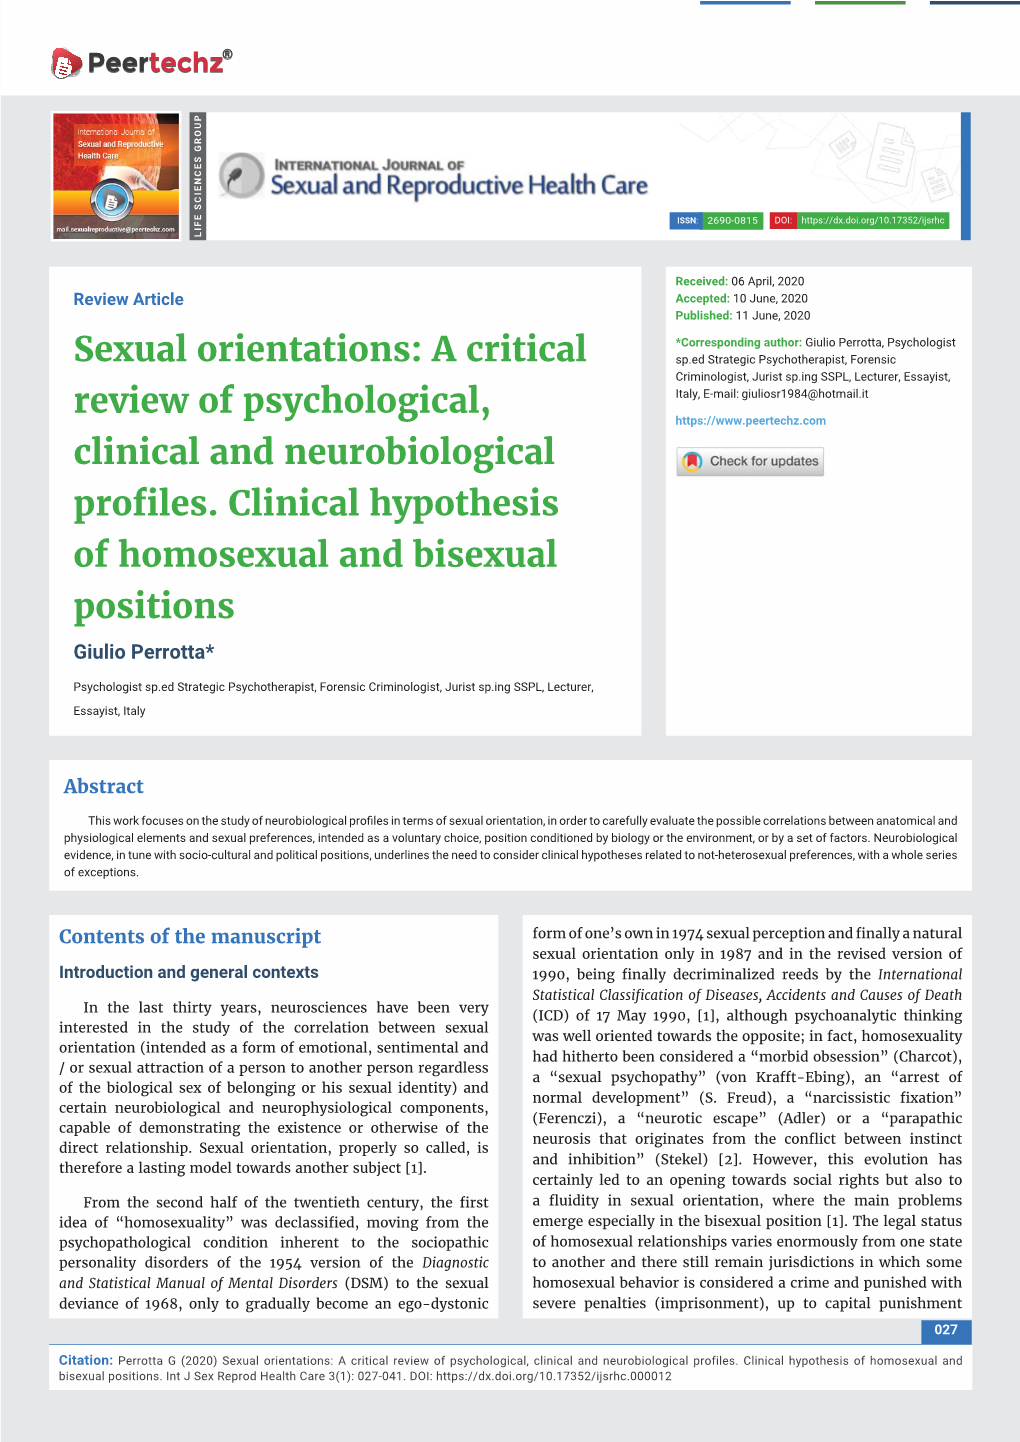 Sexual Orientations: a Critical Review of Psychological, Clinical and Neurobiological Profiles